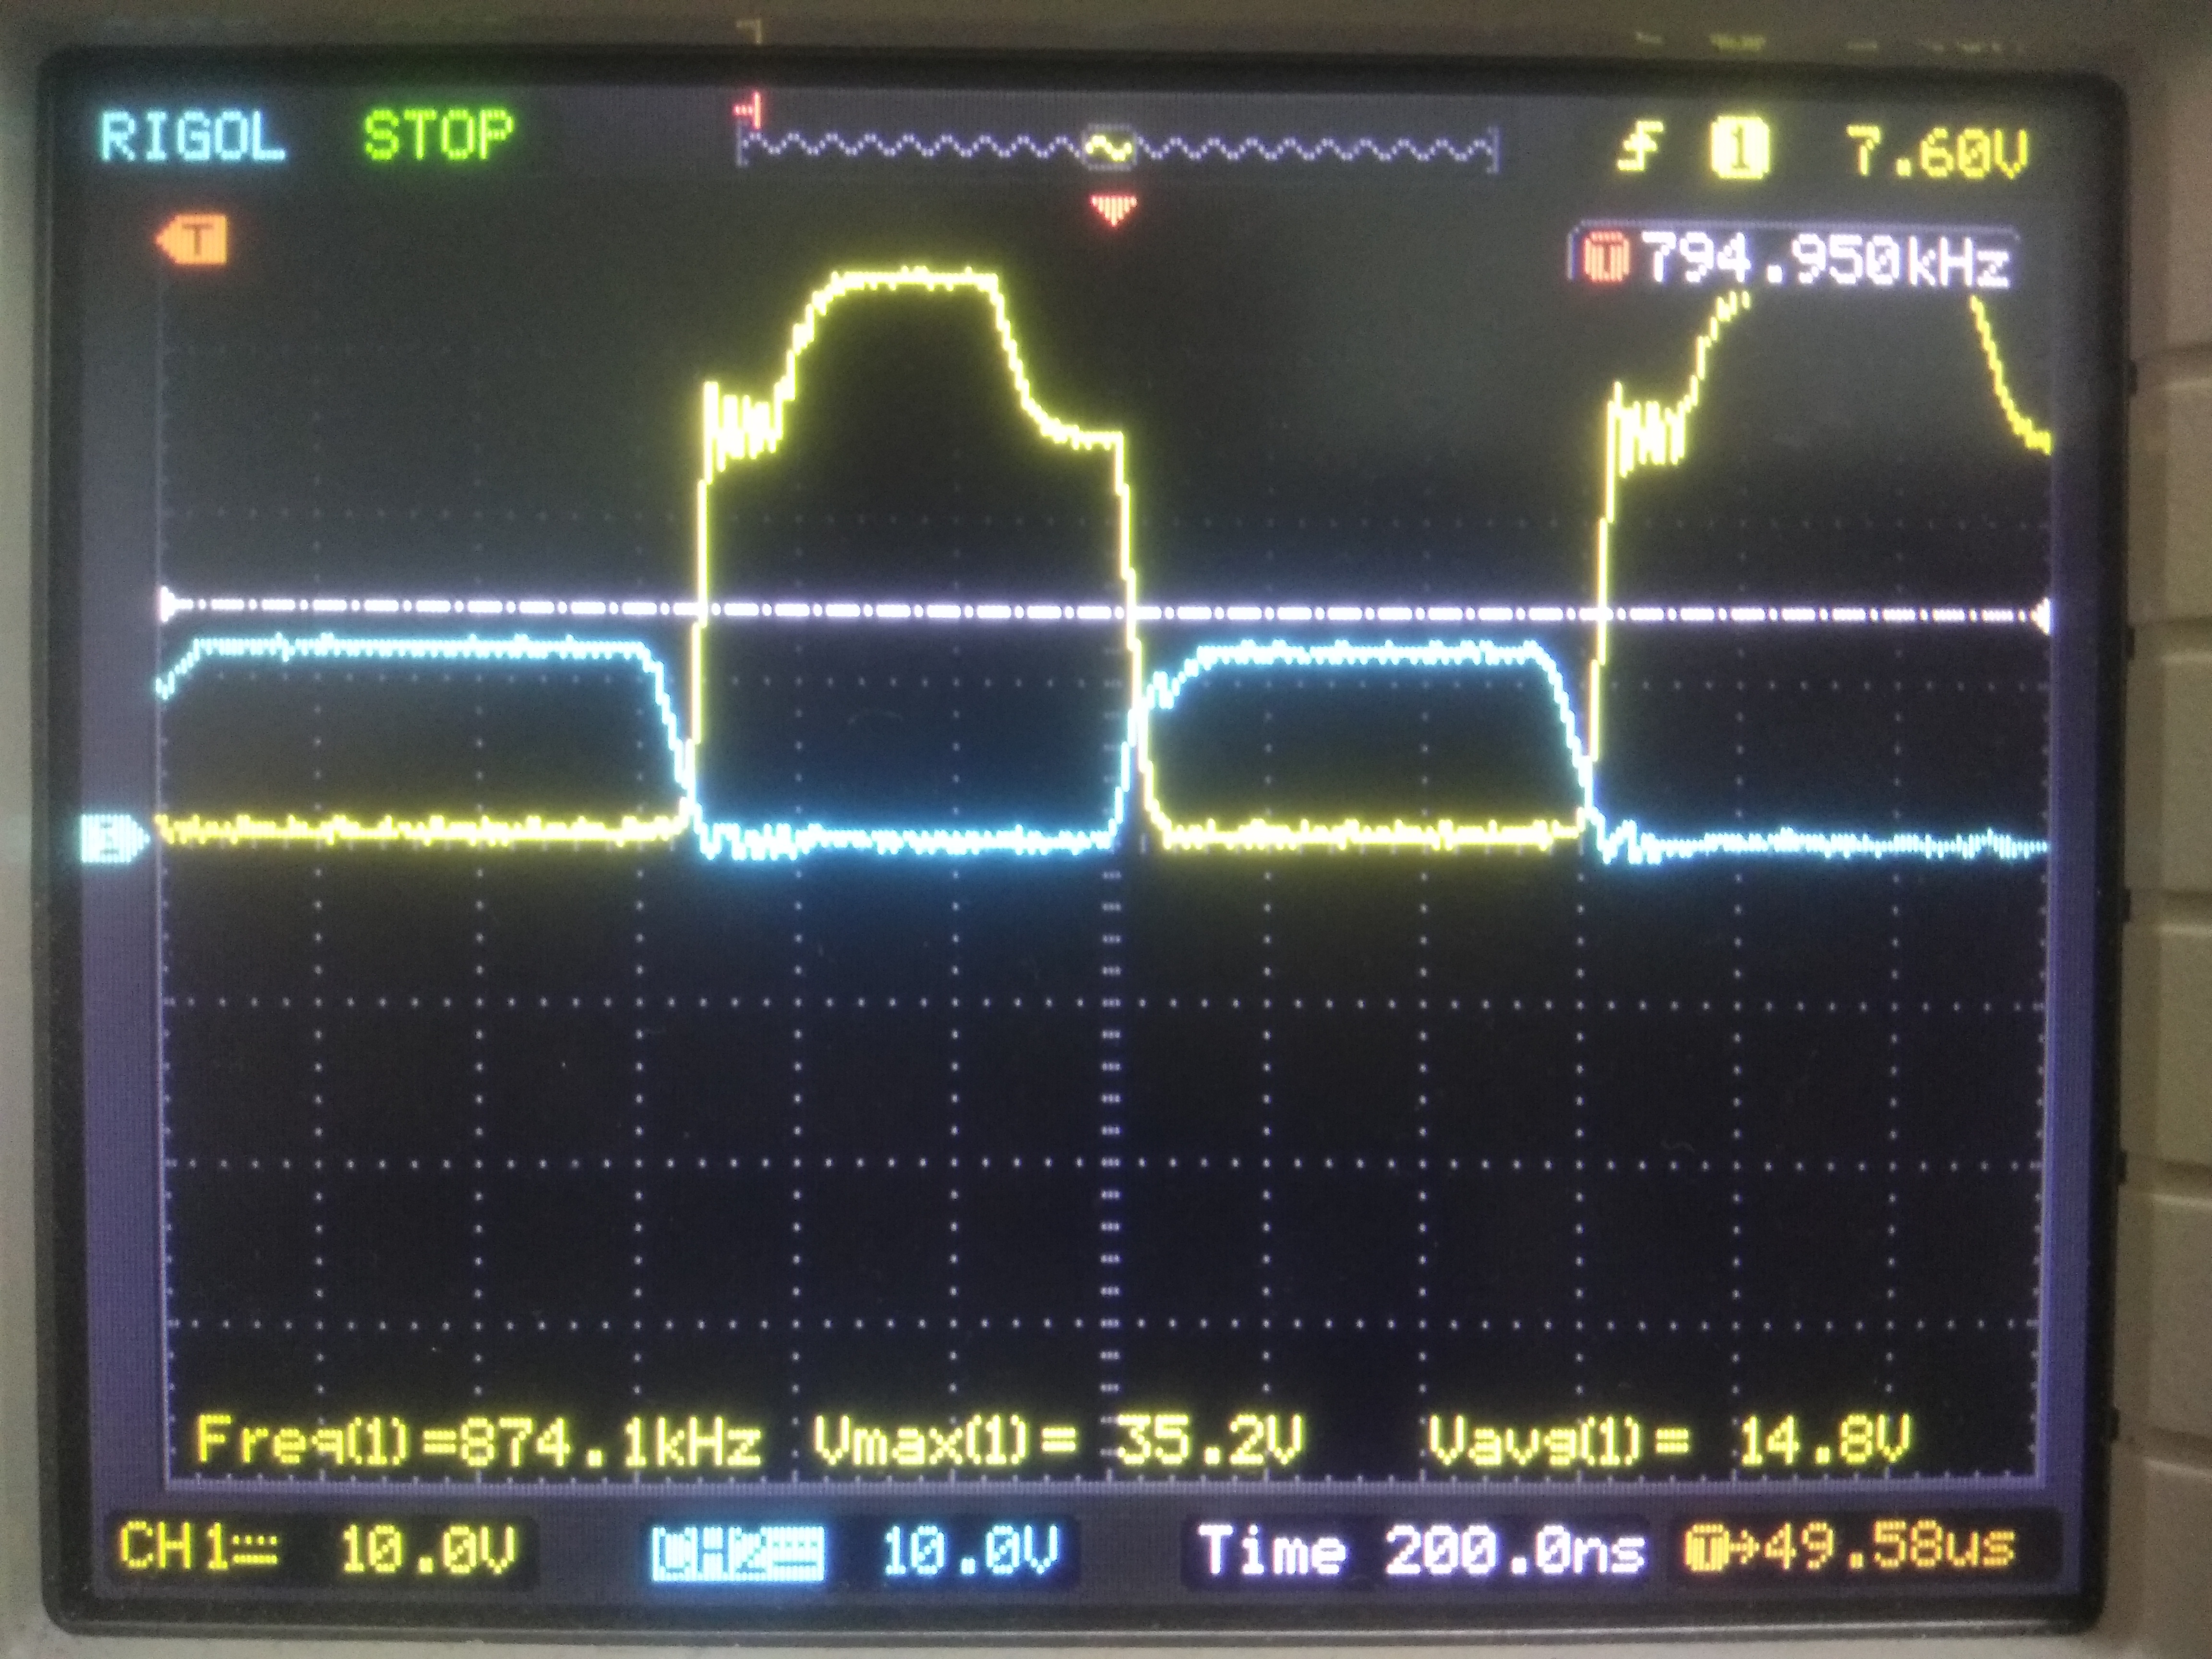 LM5122: Boost-Converter 400W 48V to 54V Single or Mutliphase? - Power  management forum - Power management - TI E2E support forums